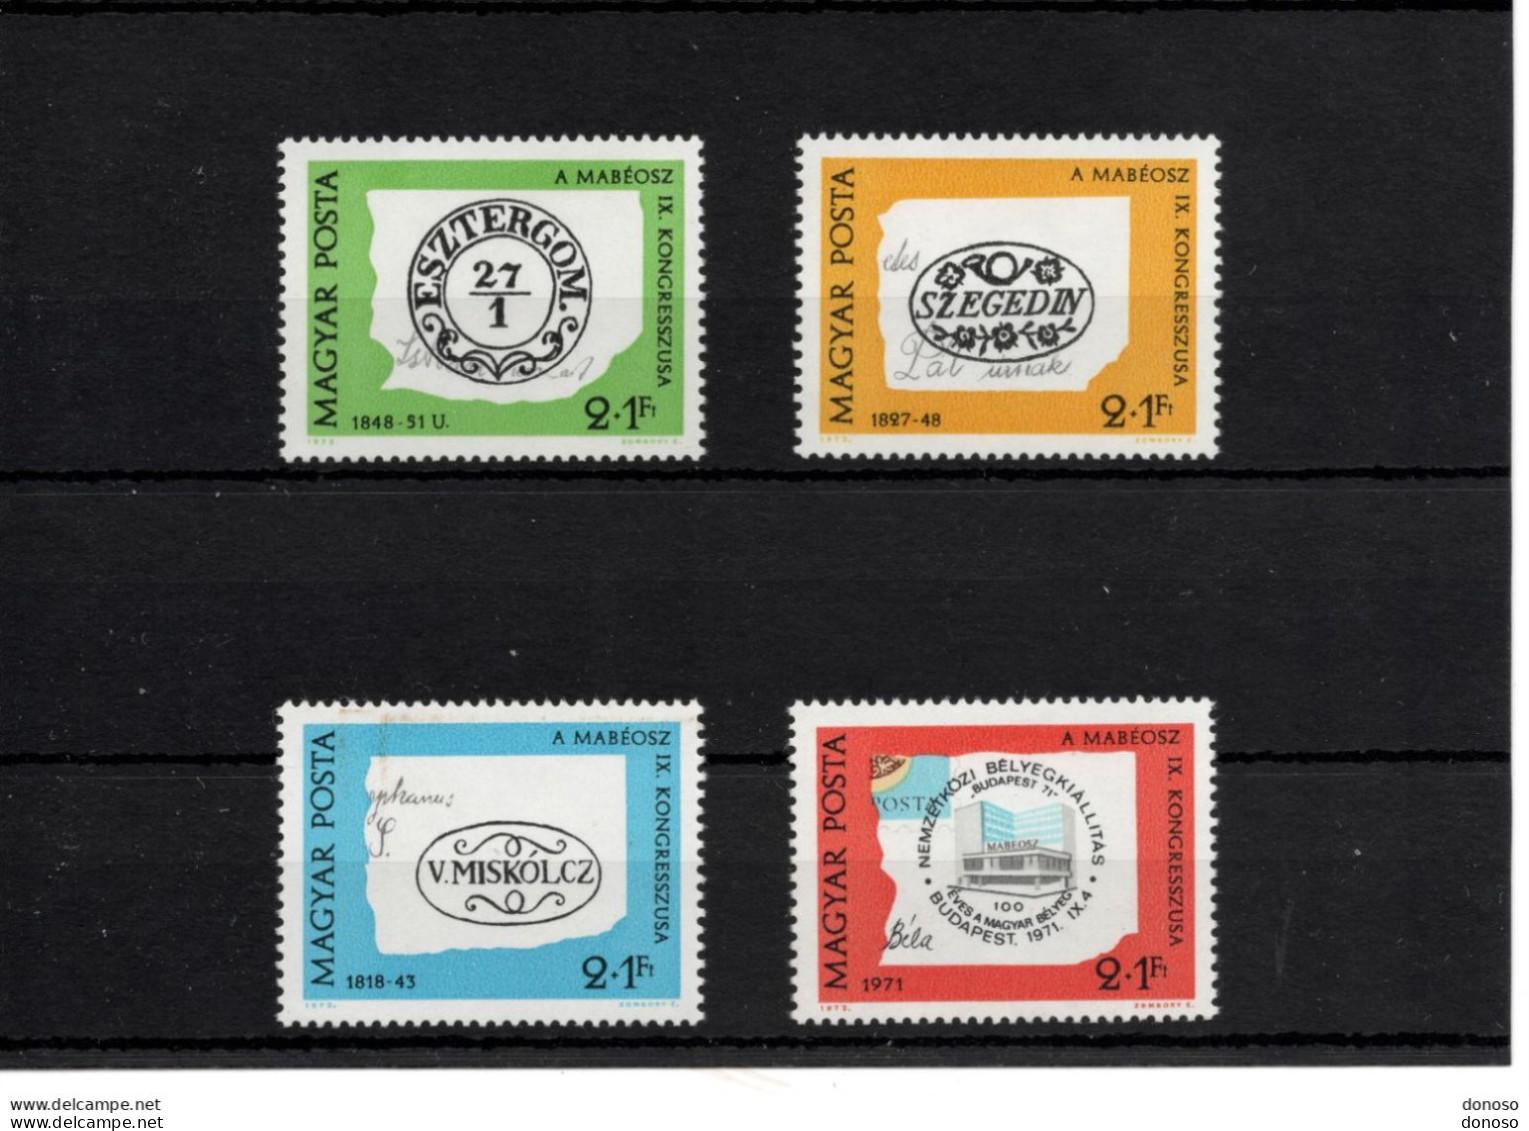 HONGRIE 1972 JOURNEE DU TIMBRE Yvert 2228-2231, Michel 2760-2763 NEUF** MNH Cote 5,20 Euros - Unused Stamps